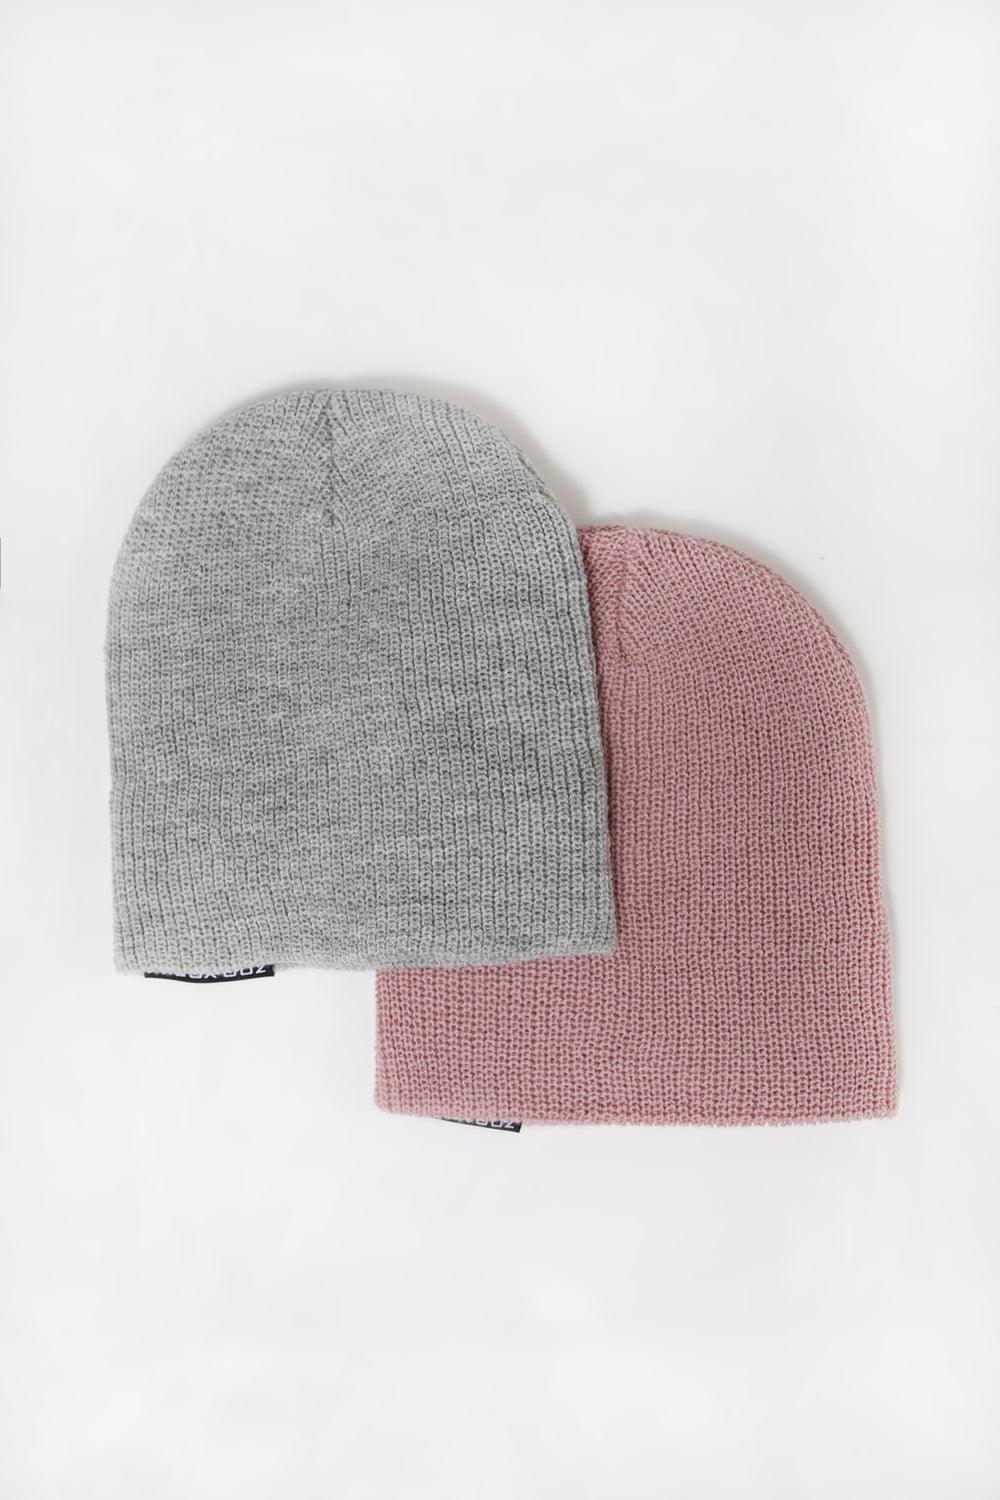 2 Tuques Style Slouchy Zoo York Homme Rose